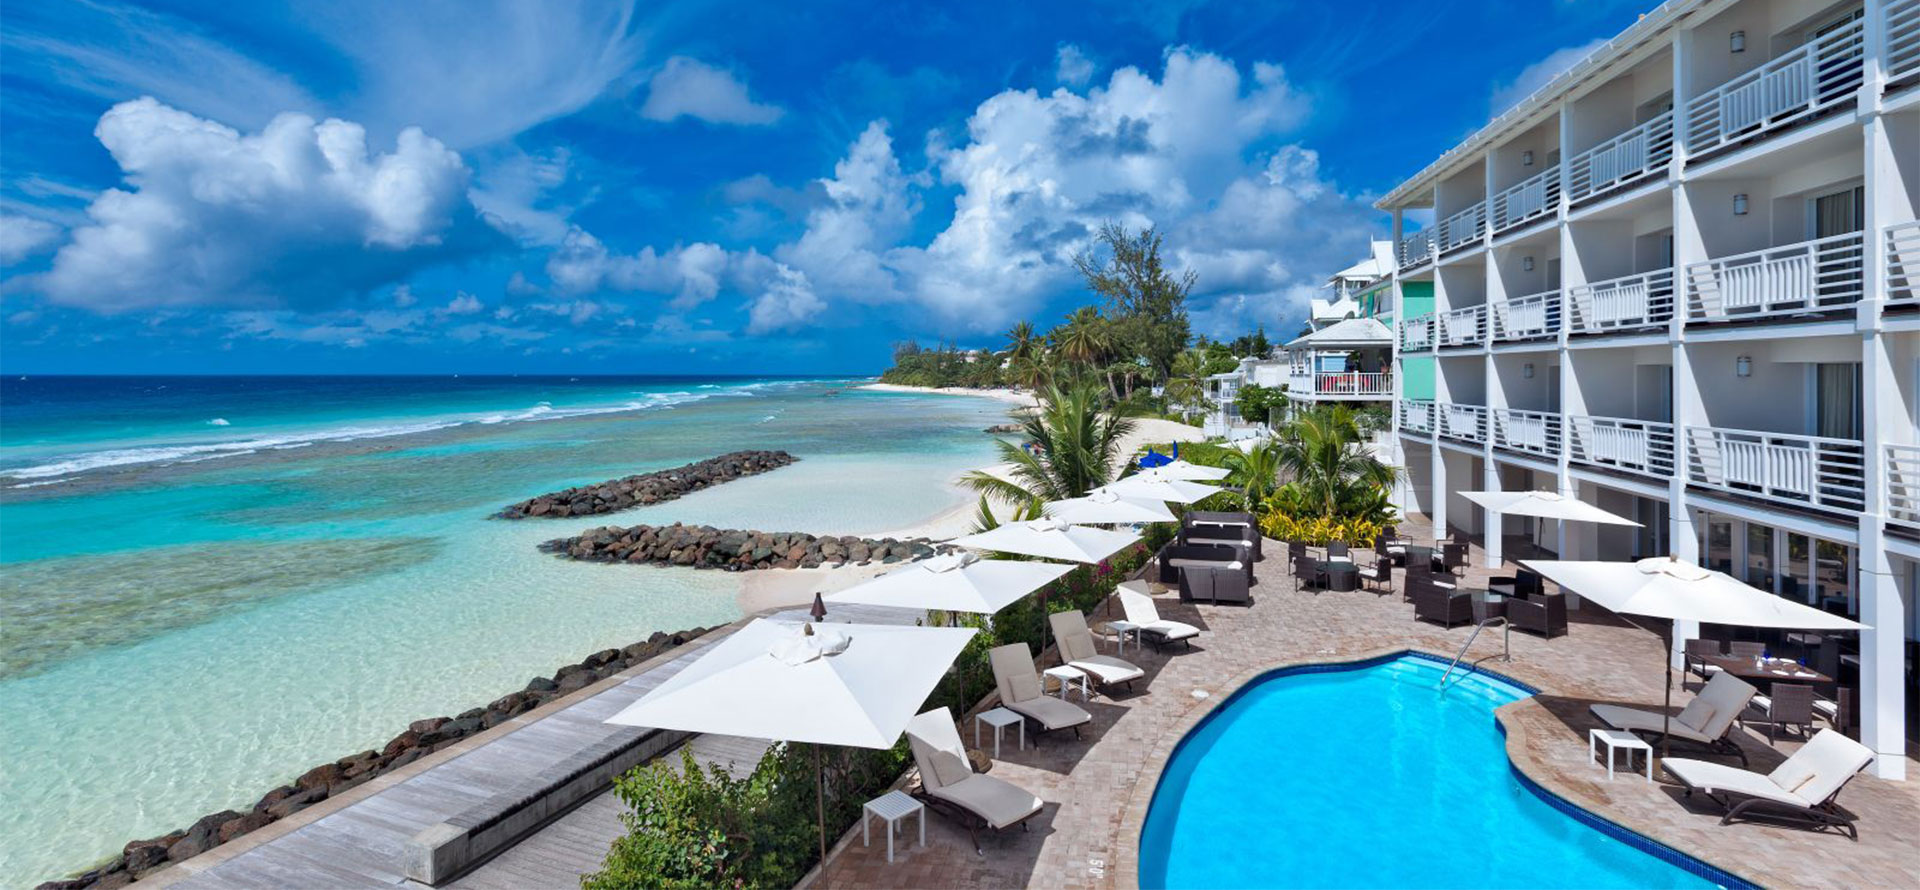 Barbados all-inclusive adults only resort and beach.